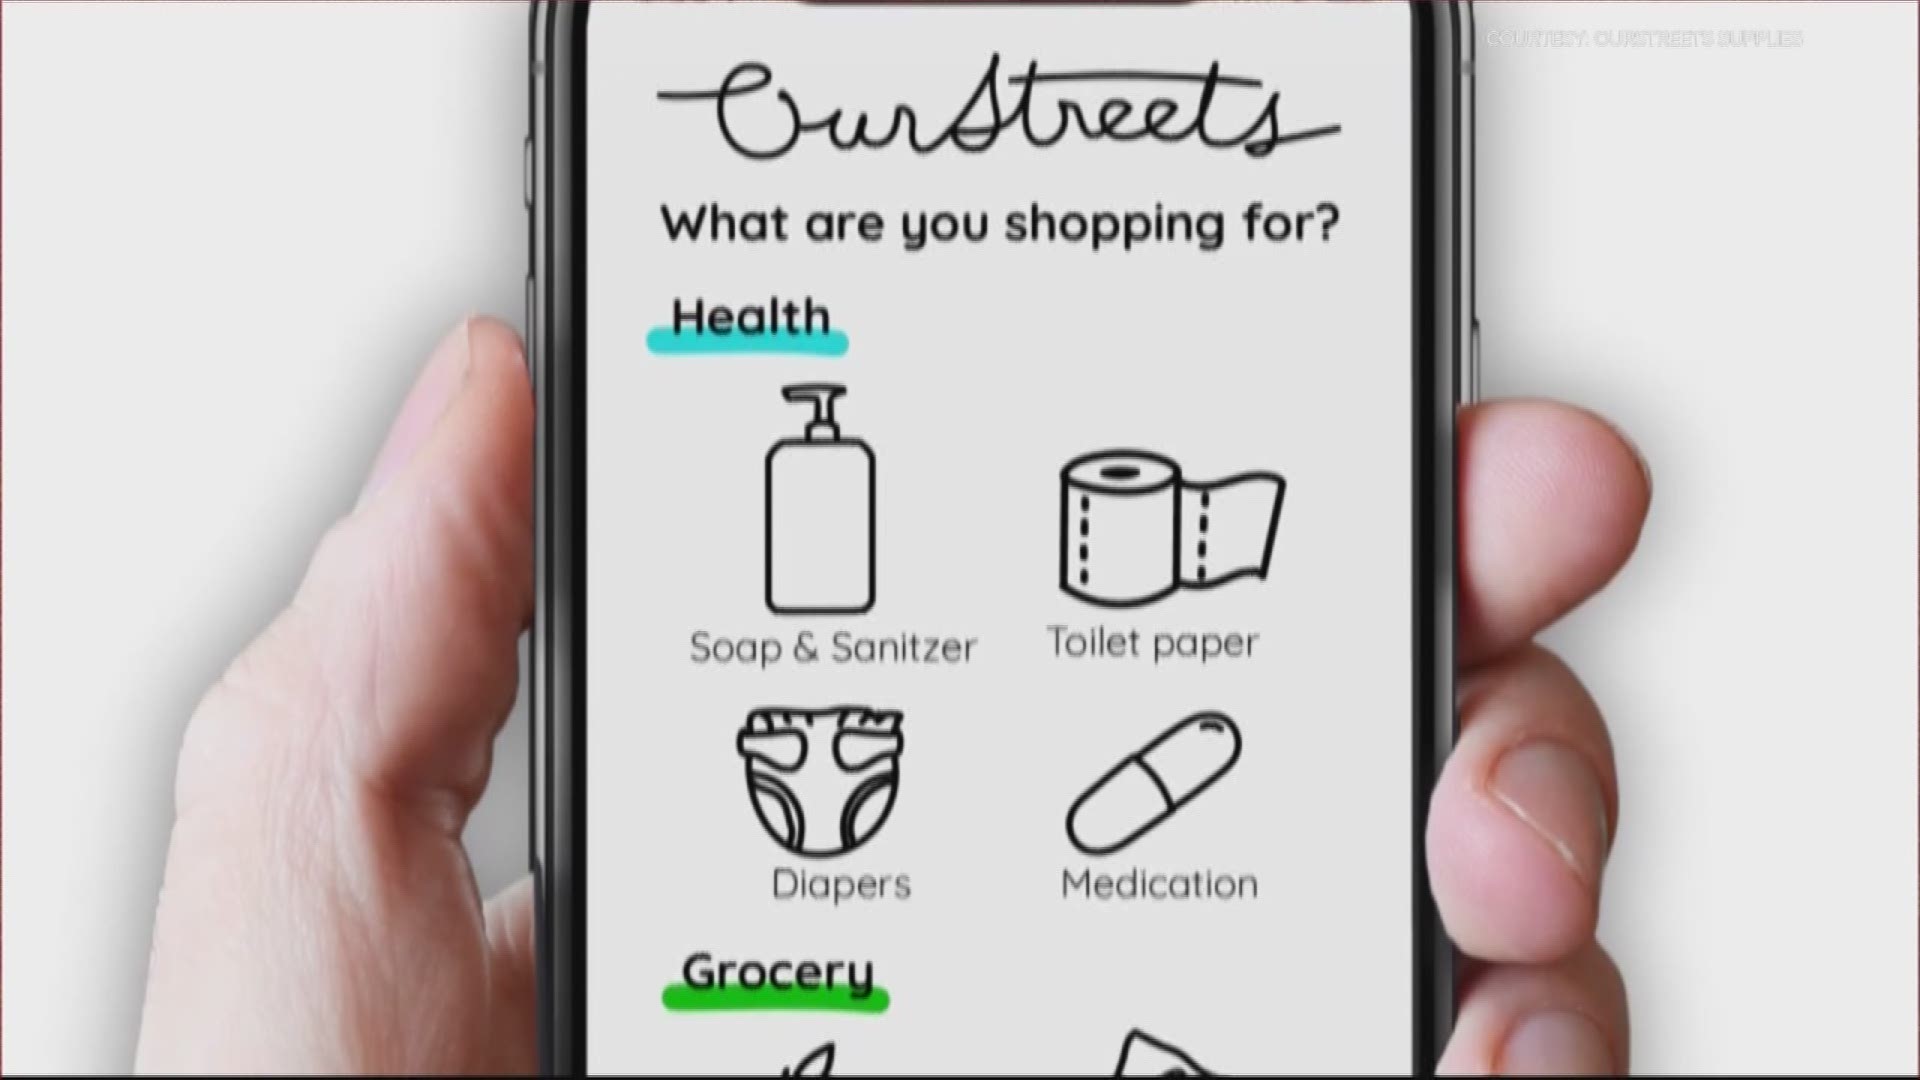 And a new app lets you track supplies like TP and hand sanitizer. This is In Other News.